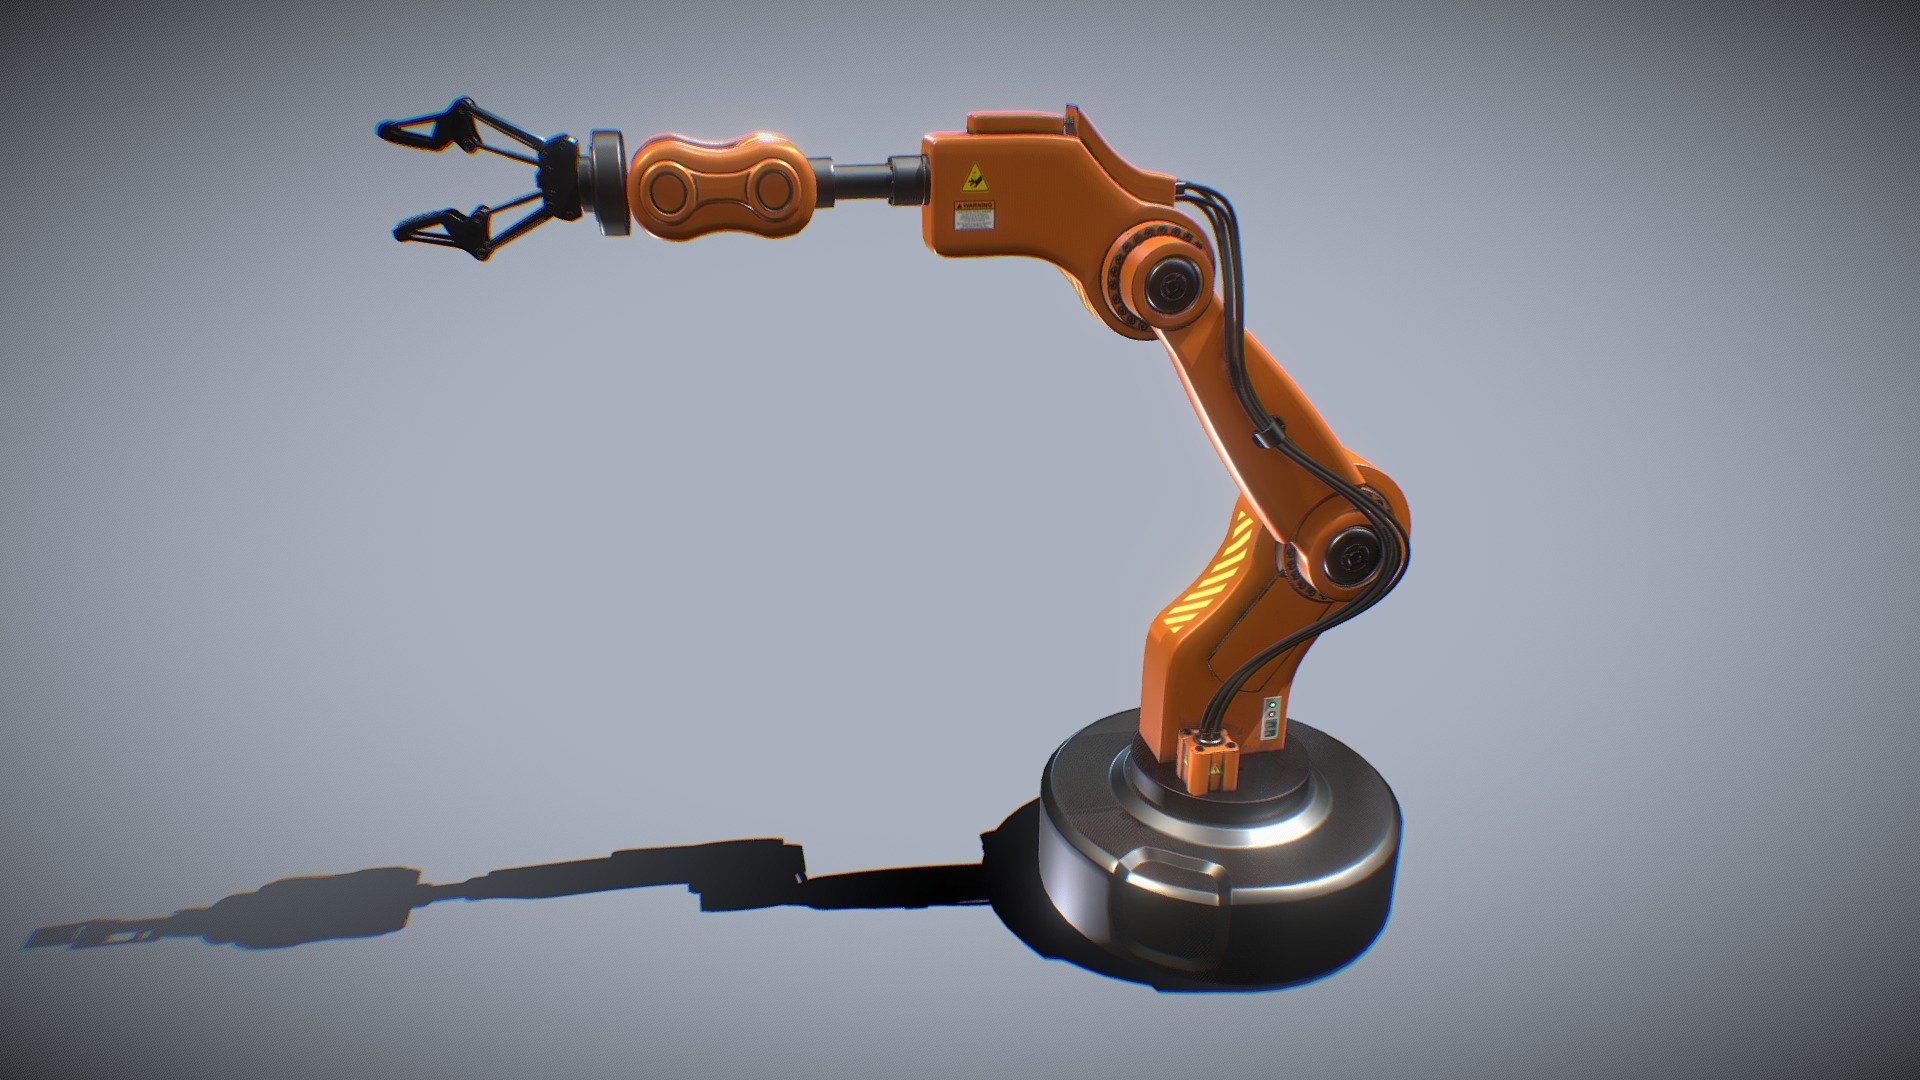 Industrial Mechanical Arm 3d Model made and rigged in Maya and texturized in Substance Painter 3D. This is my first model uploaded here!!
More in my ArtStation: https://www.artstation.com/sergio_molina_3d - Industrial Mechanical Arm - 3D model by Sergio Molina (@sergiomolina3d) 3d model